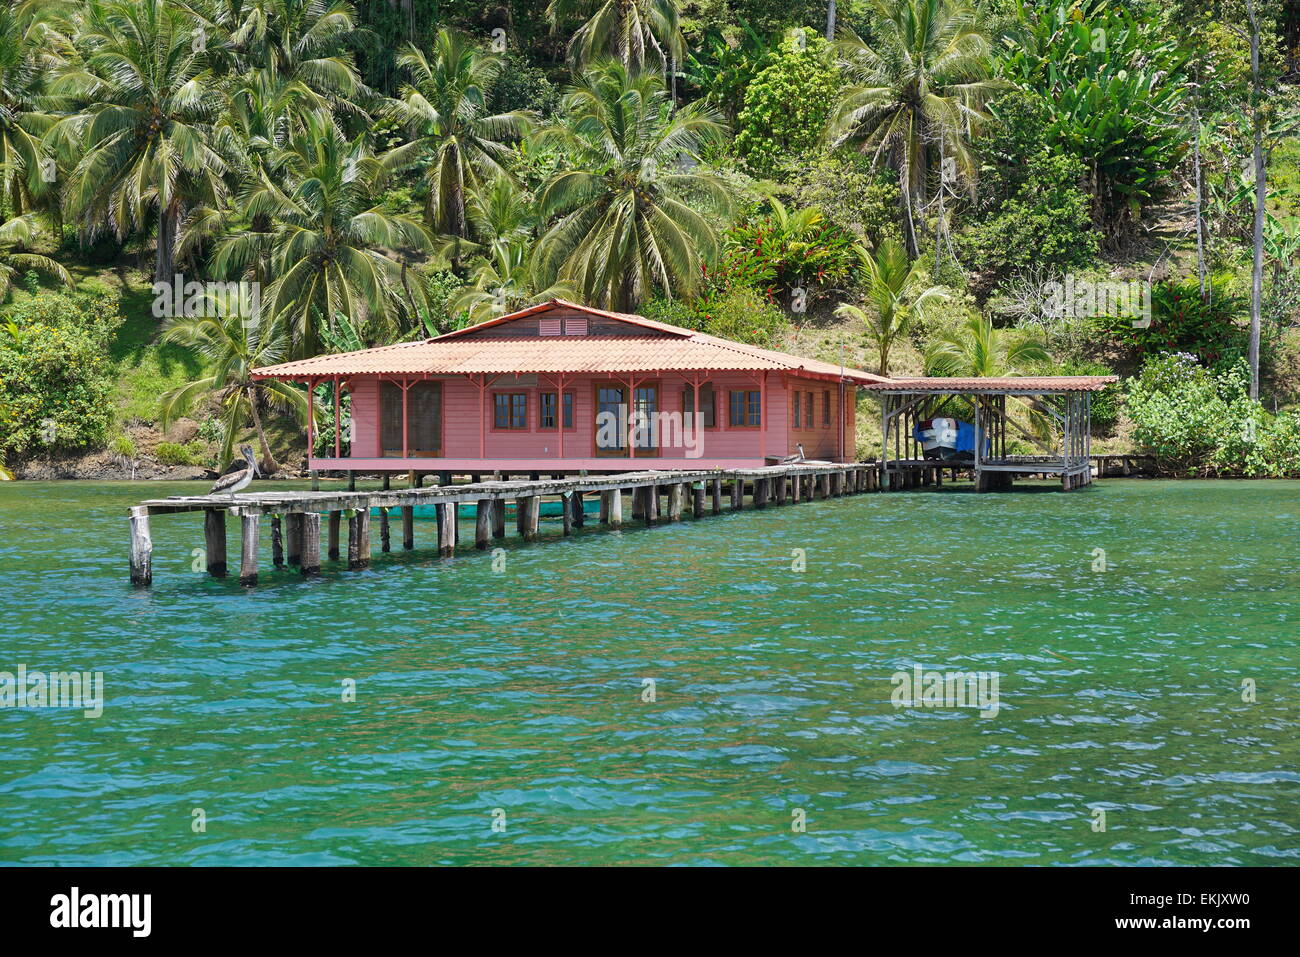 Caribbean house with dock over the water and tropical vegetation on the land, Bocas del Toro, Panama, Central America Stock Photo